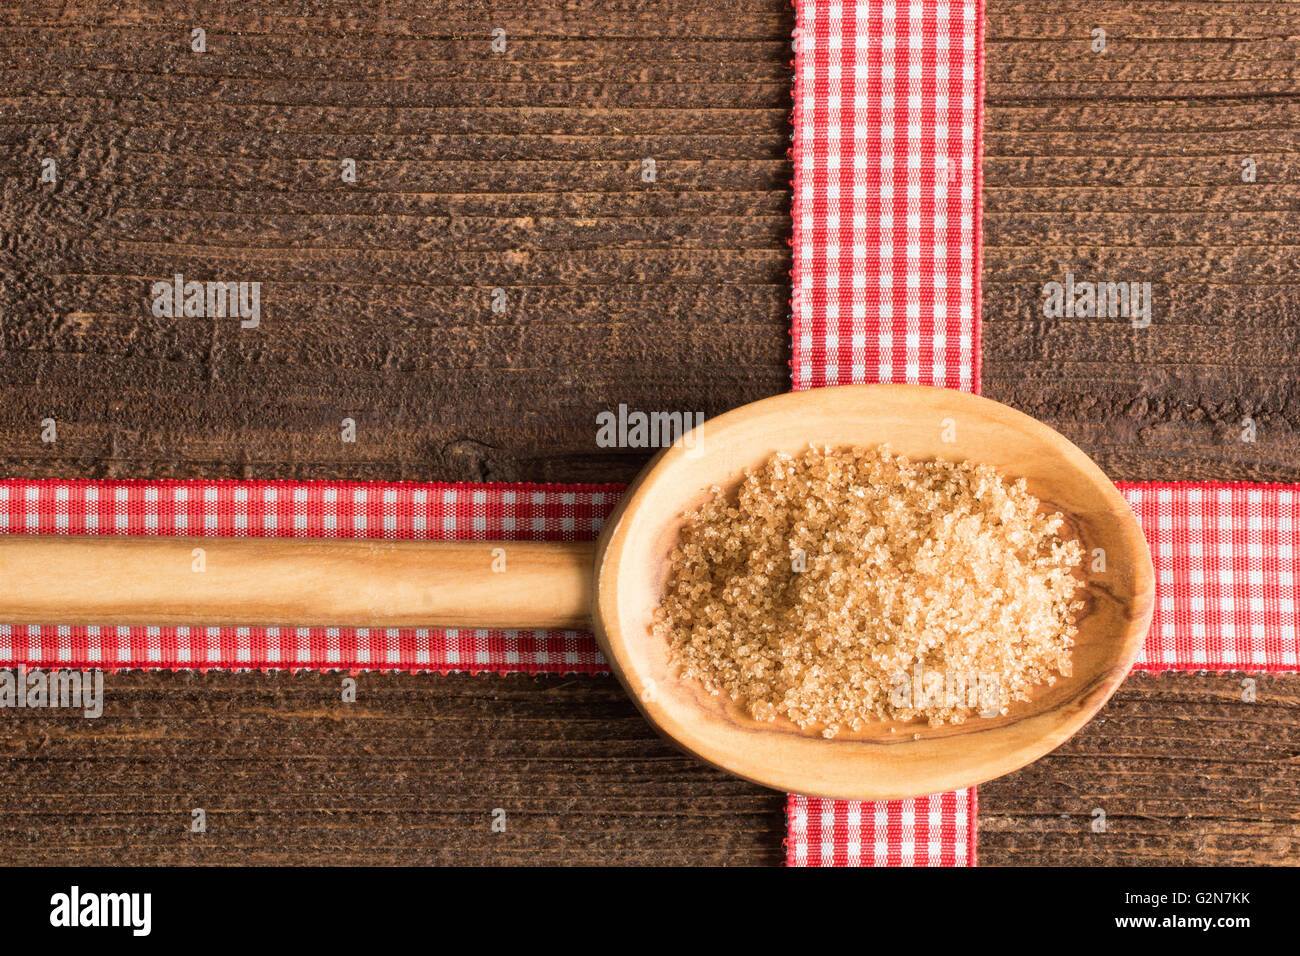 Rustic background with cane sugar on a wooden spoon on a rustic table. Stock Photo